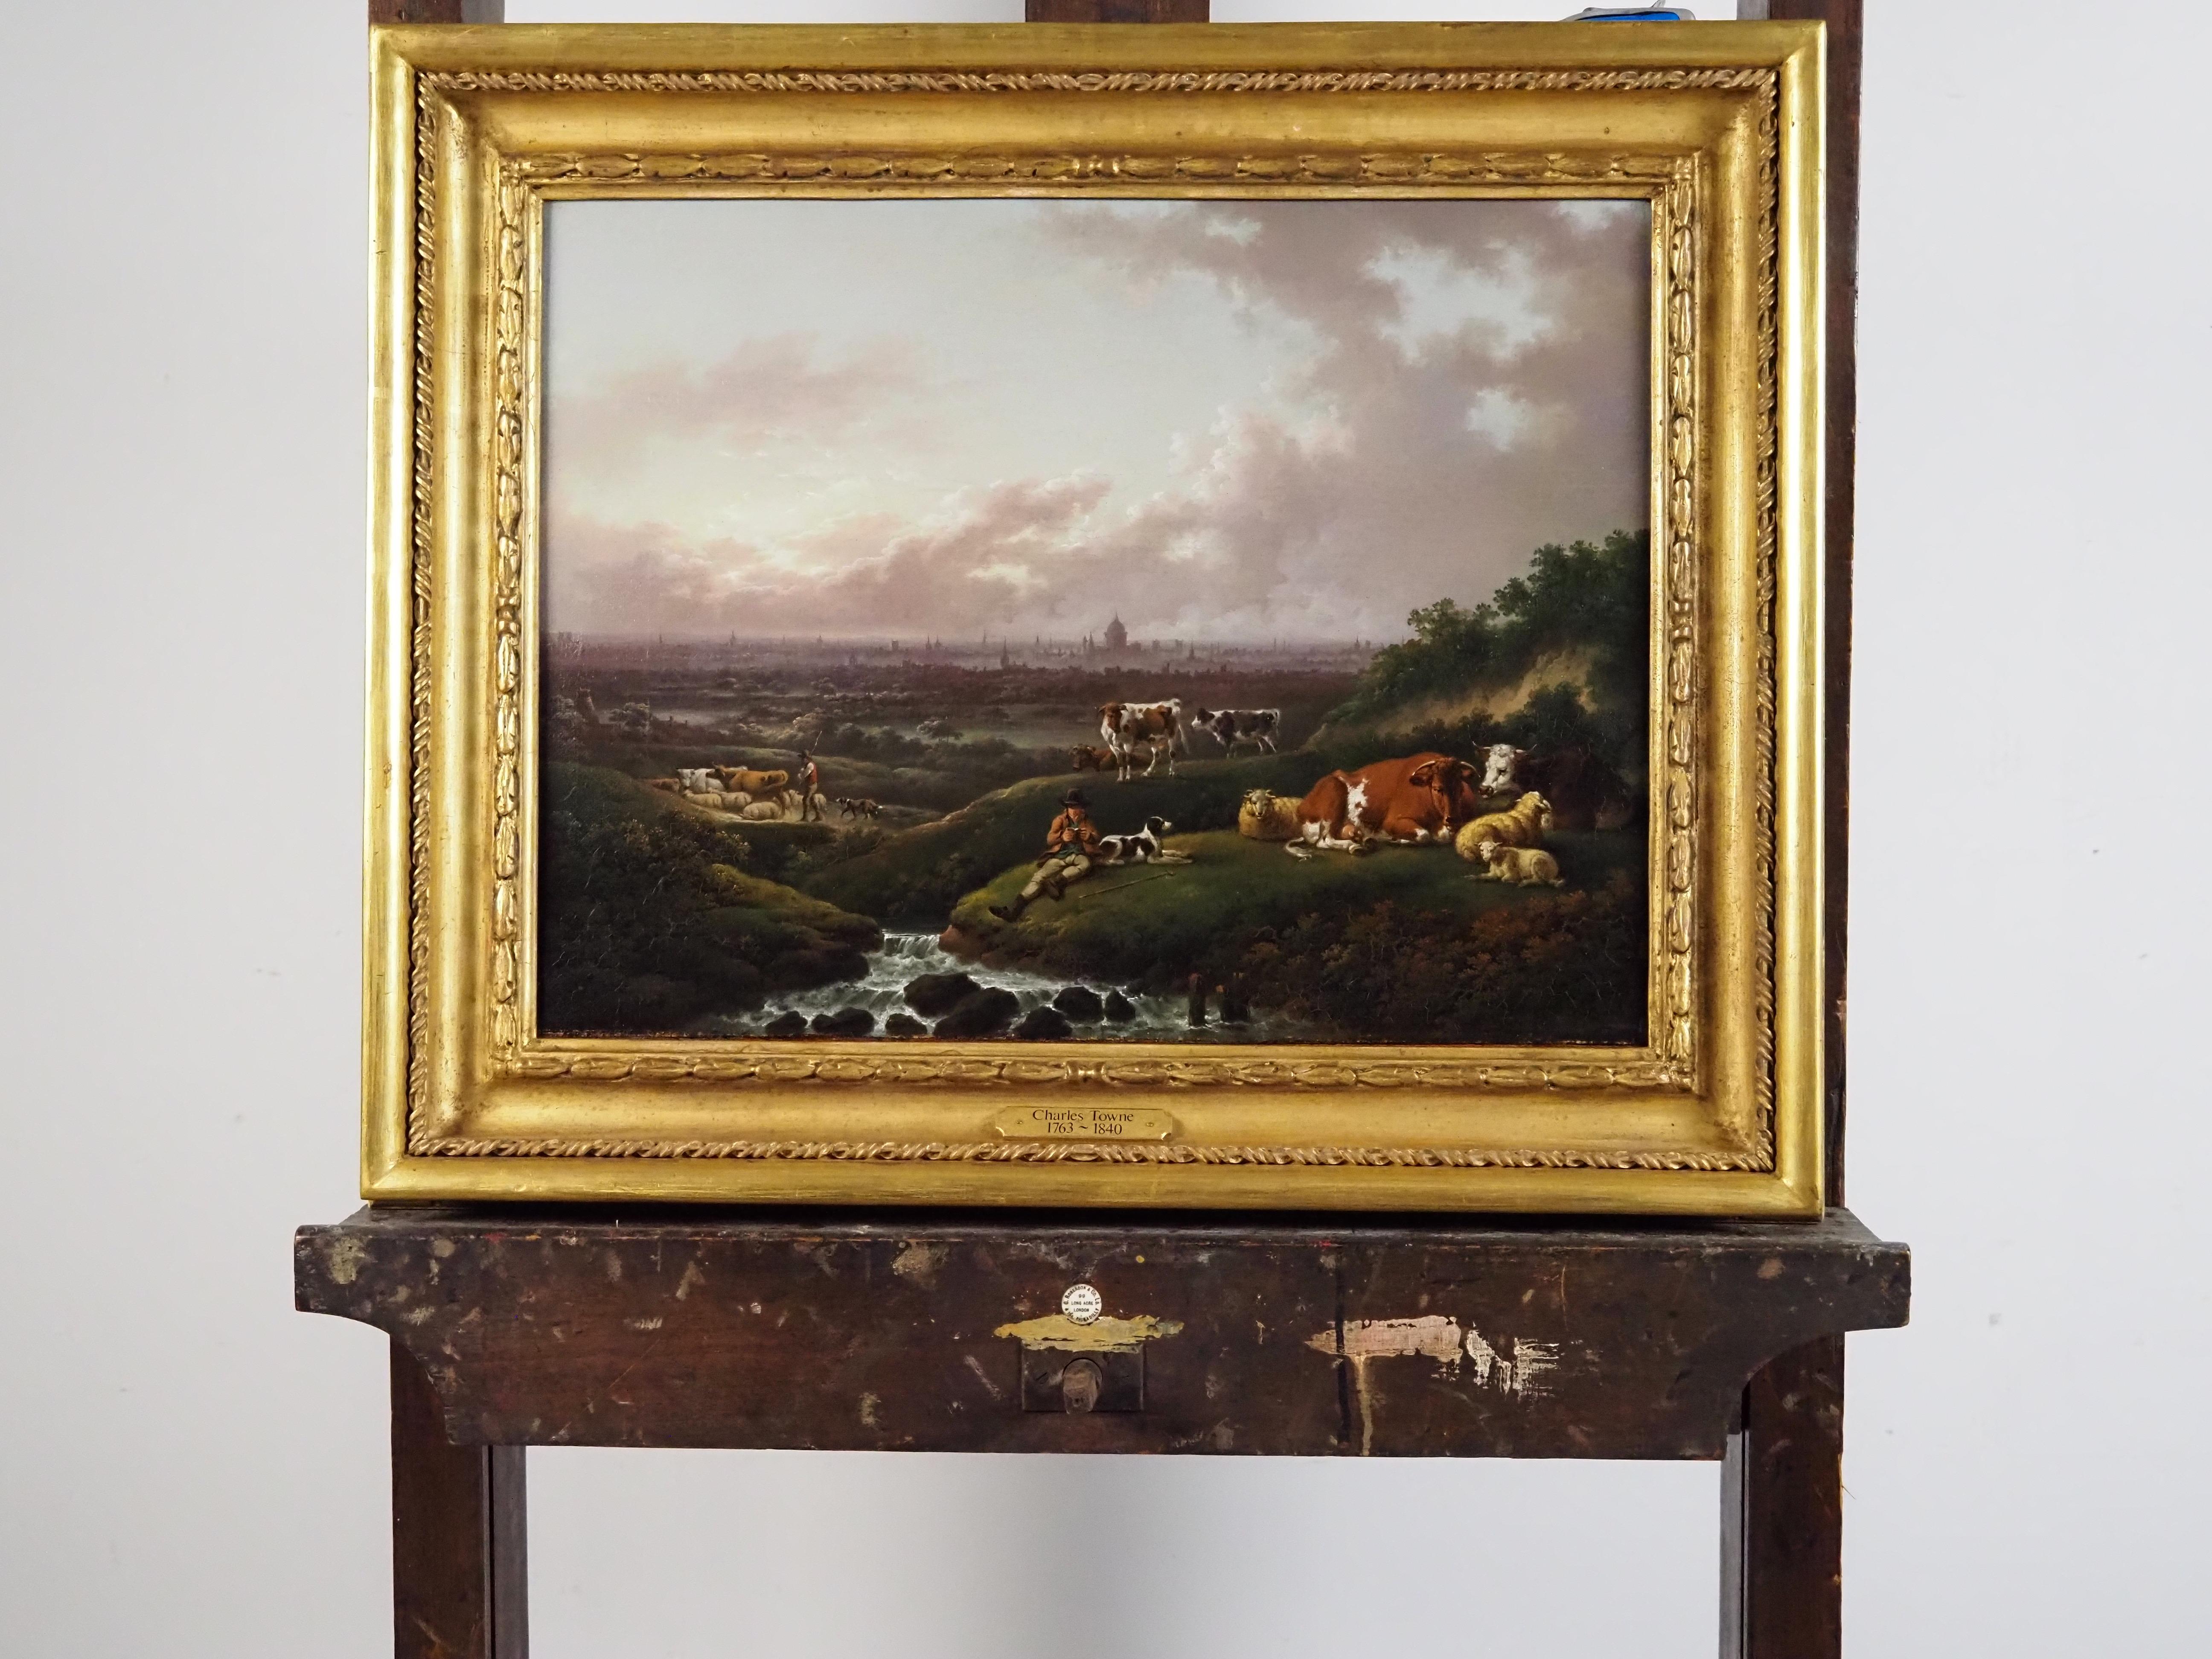 London : A distant view of the city from the south with a herdsman and cattle  - Brown Landscape Painting by Charles Towne